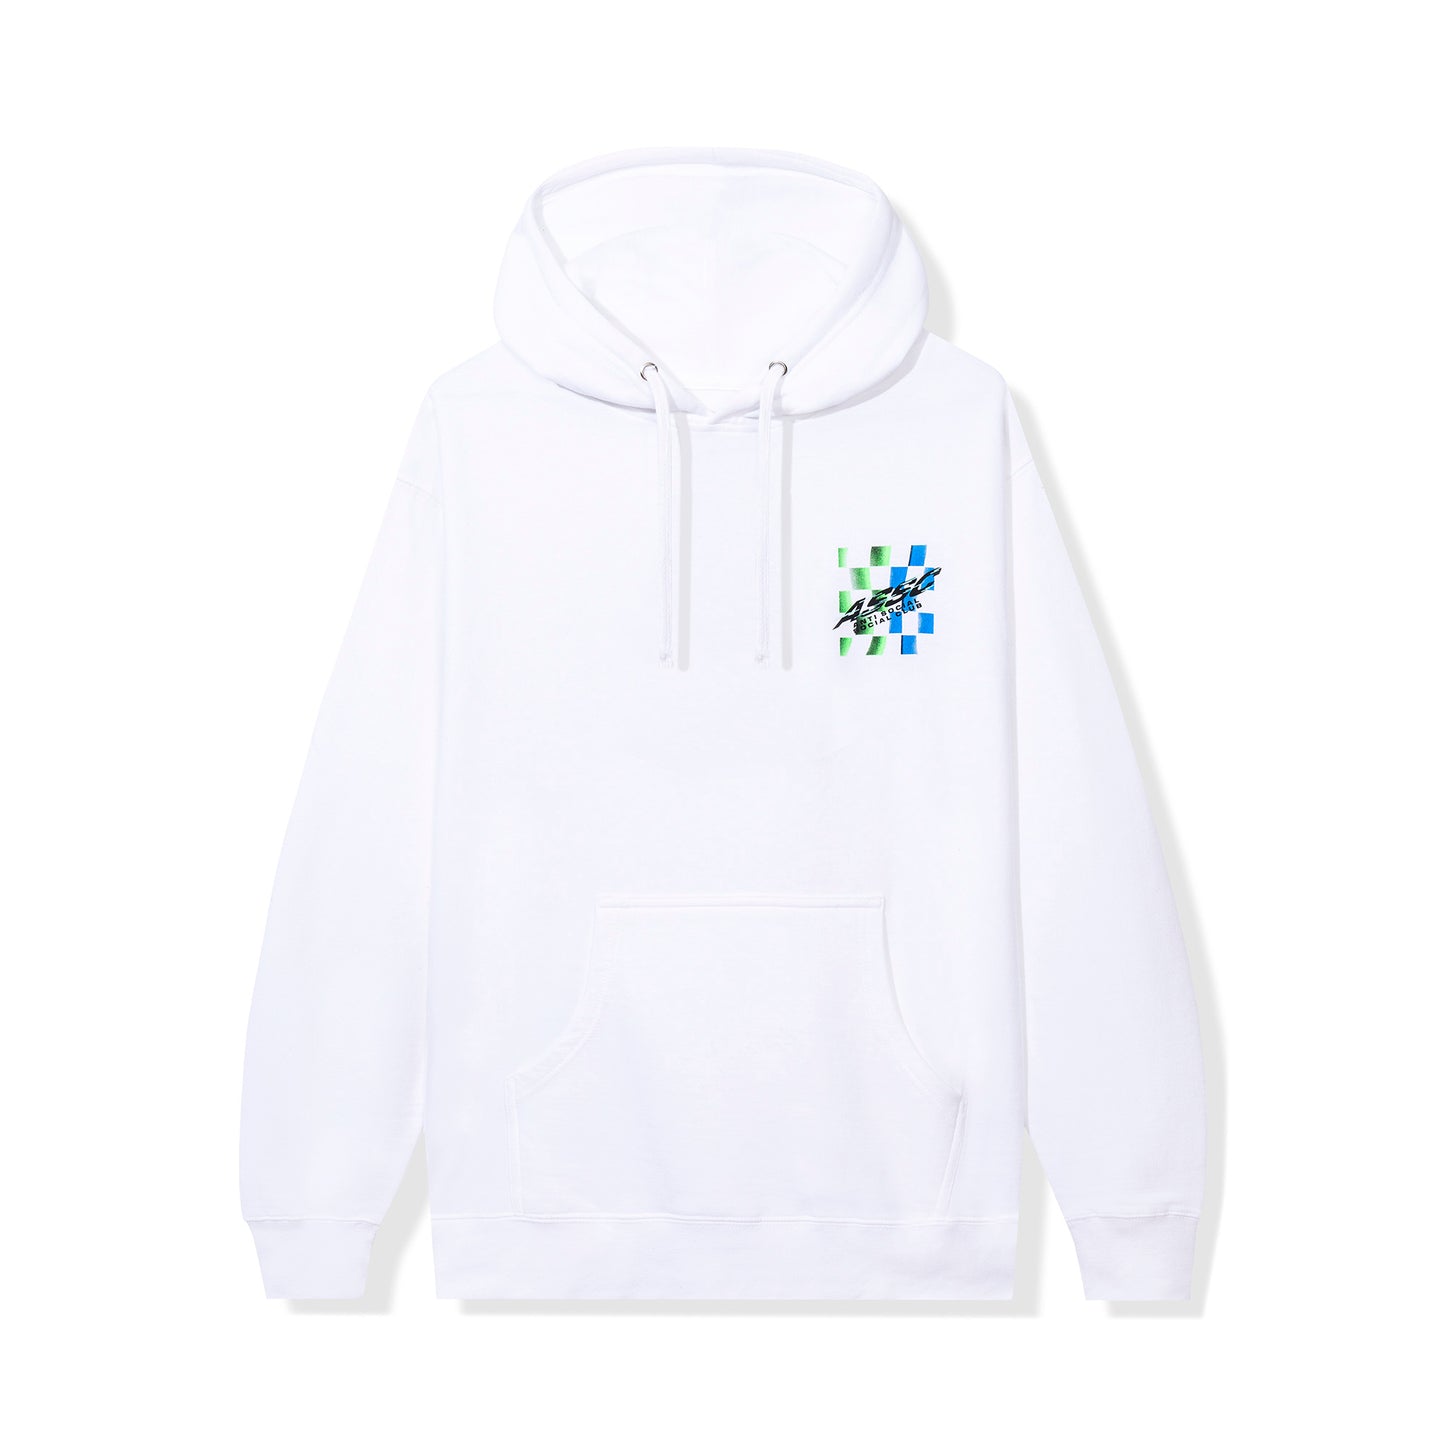 For Granted Hoodie - White